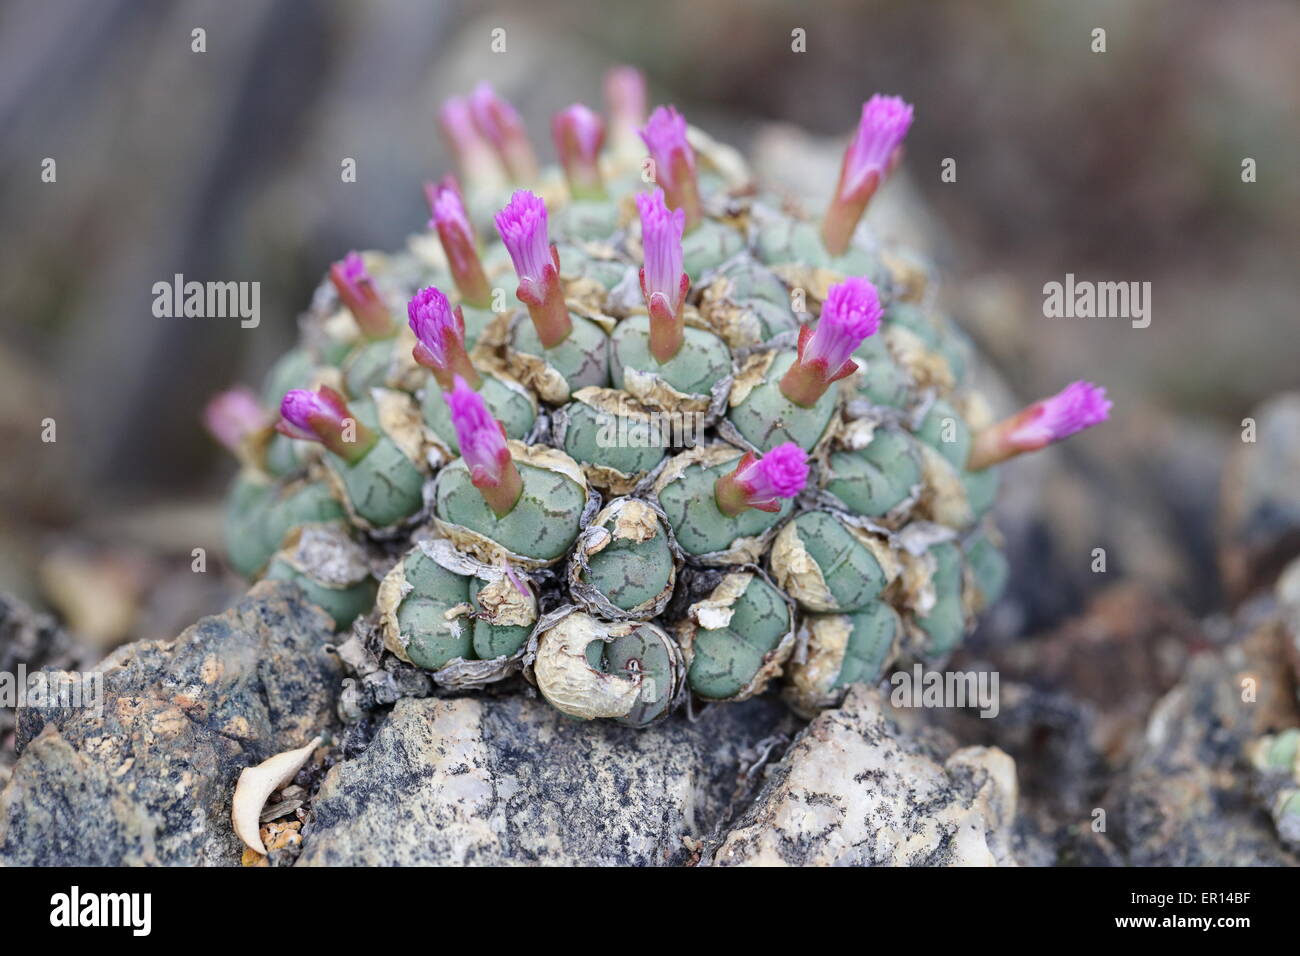 Clump of a conophytum species in flower, in the Worcester area, South Africa Stock Photo